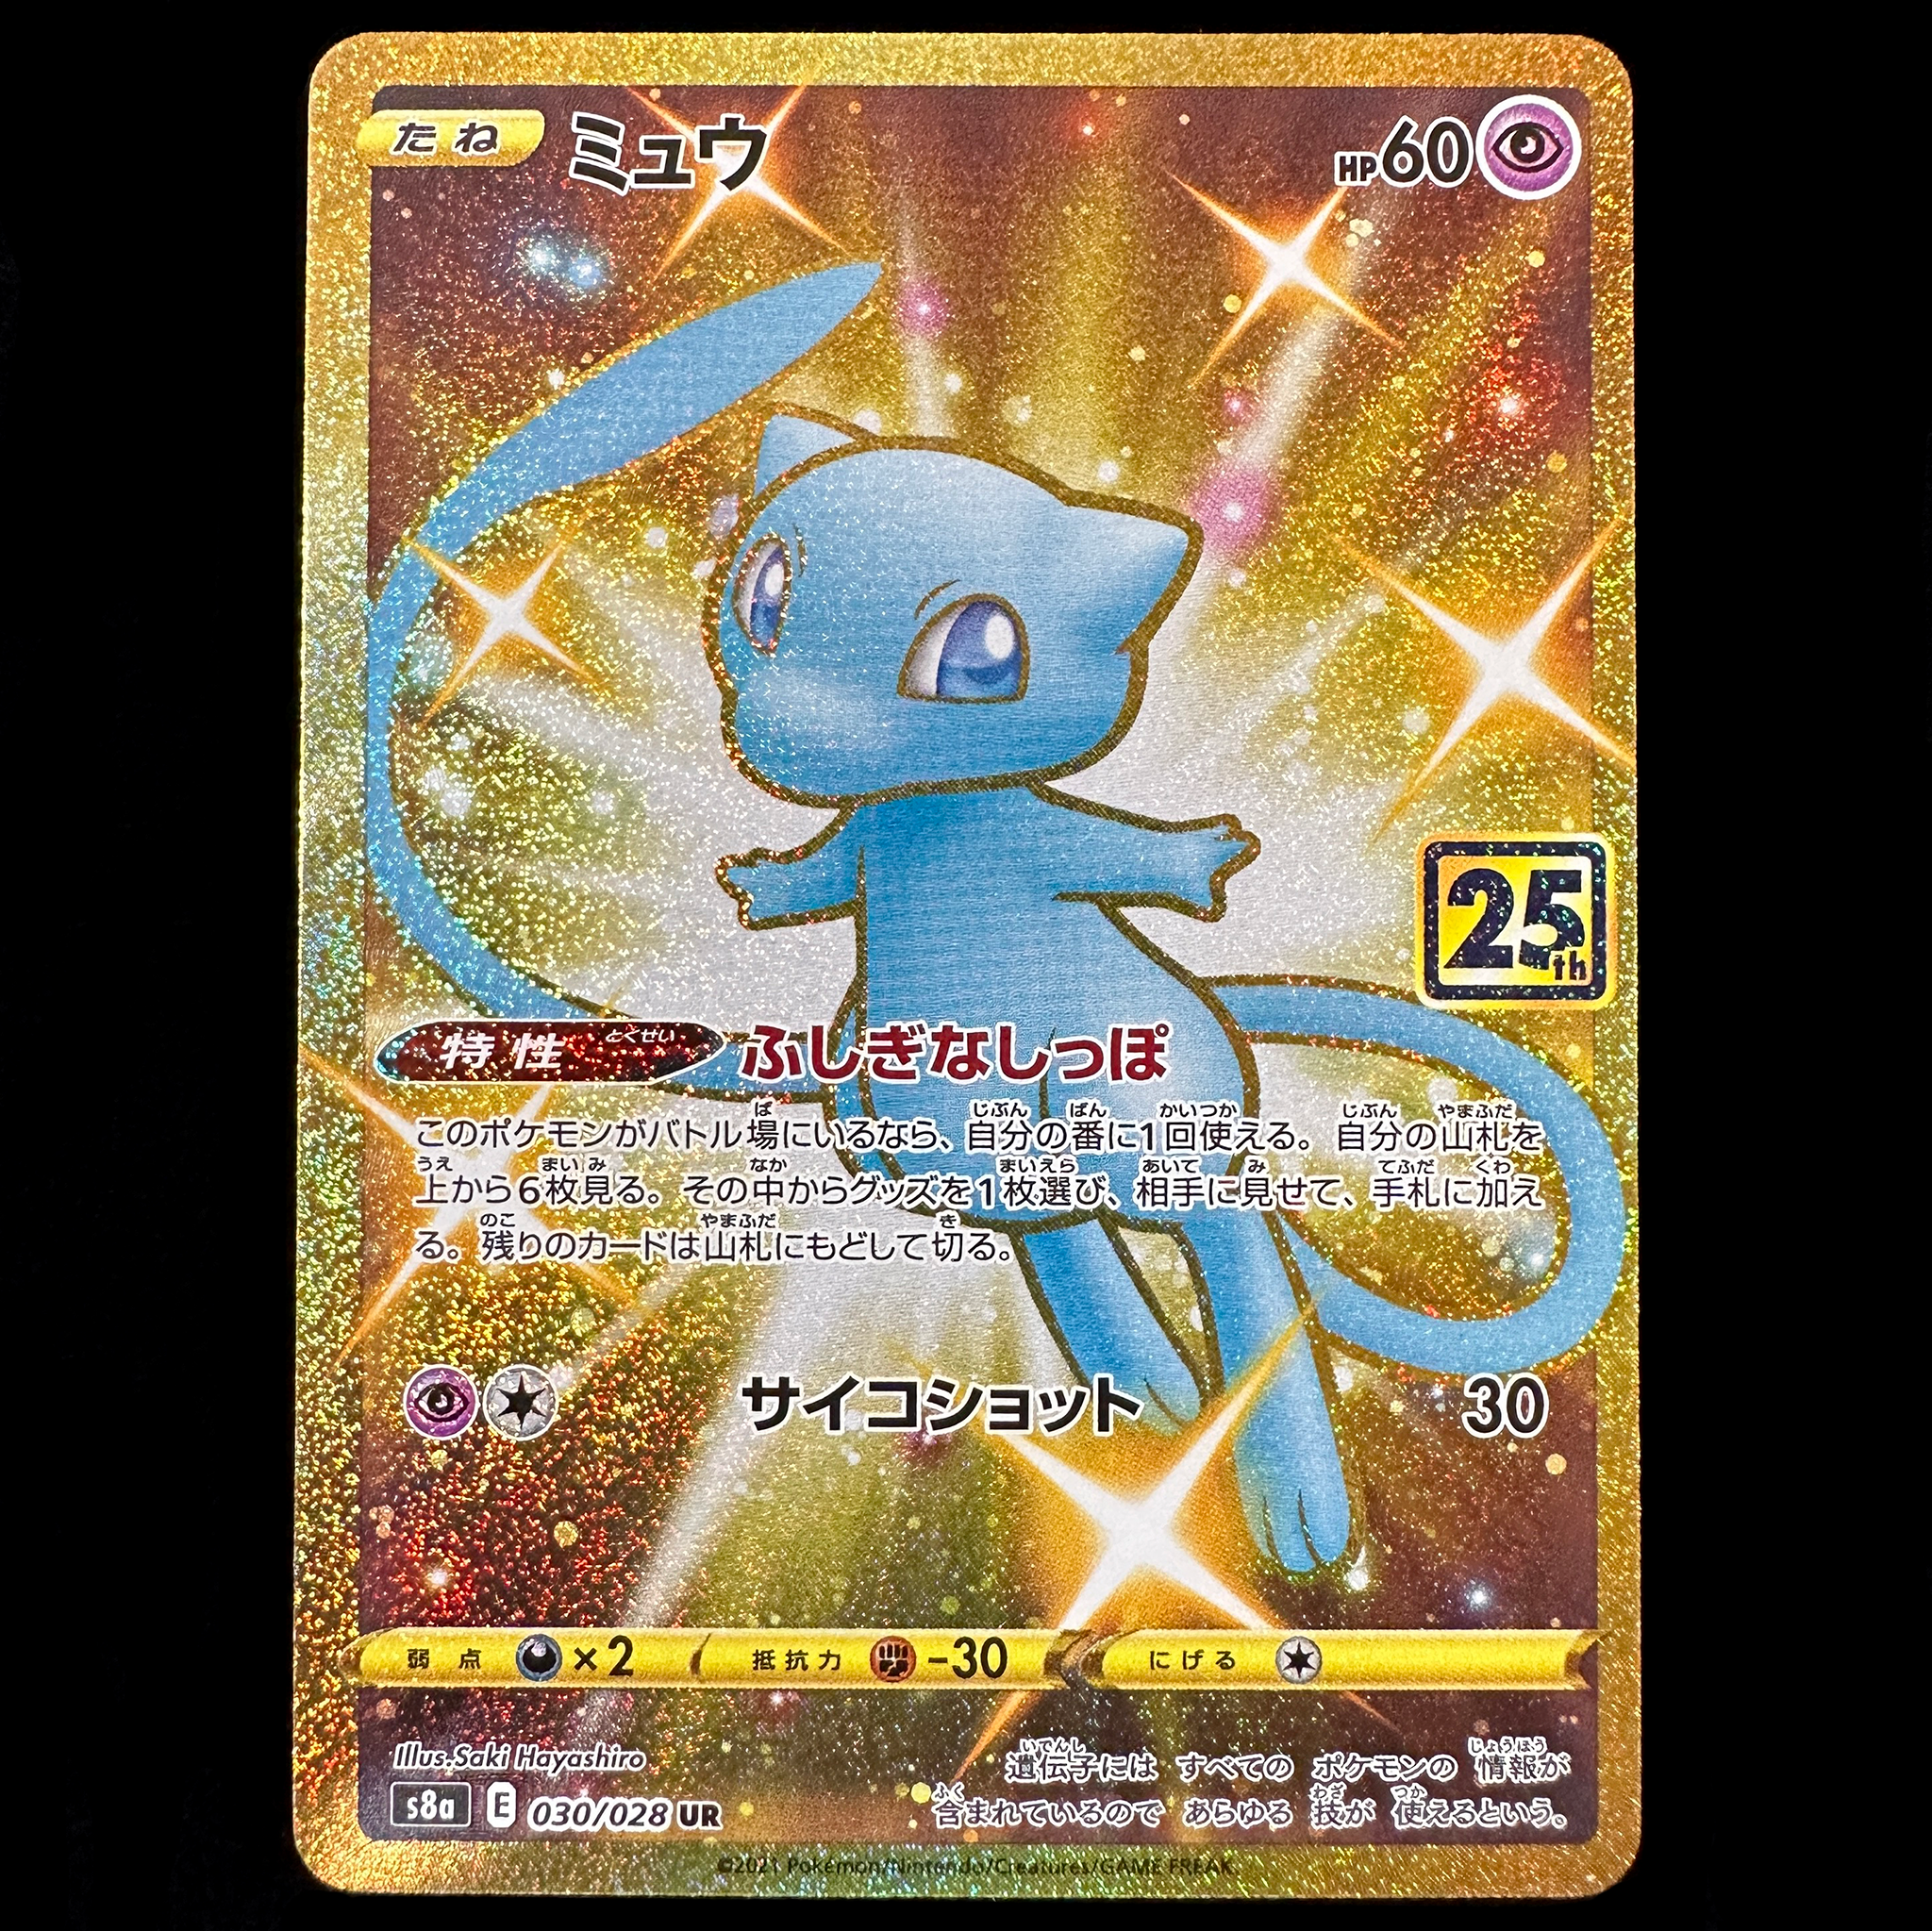 POKÉMON CARD GAME Sword & Shield Expansion pack ｢25th ANNIVERSARY COLLECTION｣  POKÉMON CARD GAME S8a 030/028 Ultra Rare card  Mew